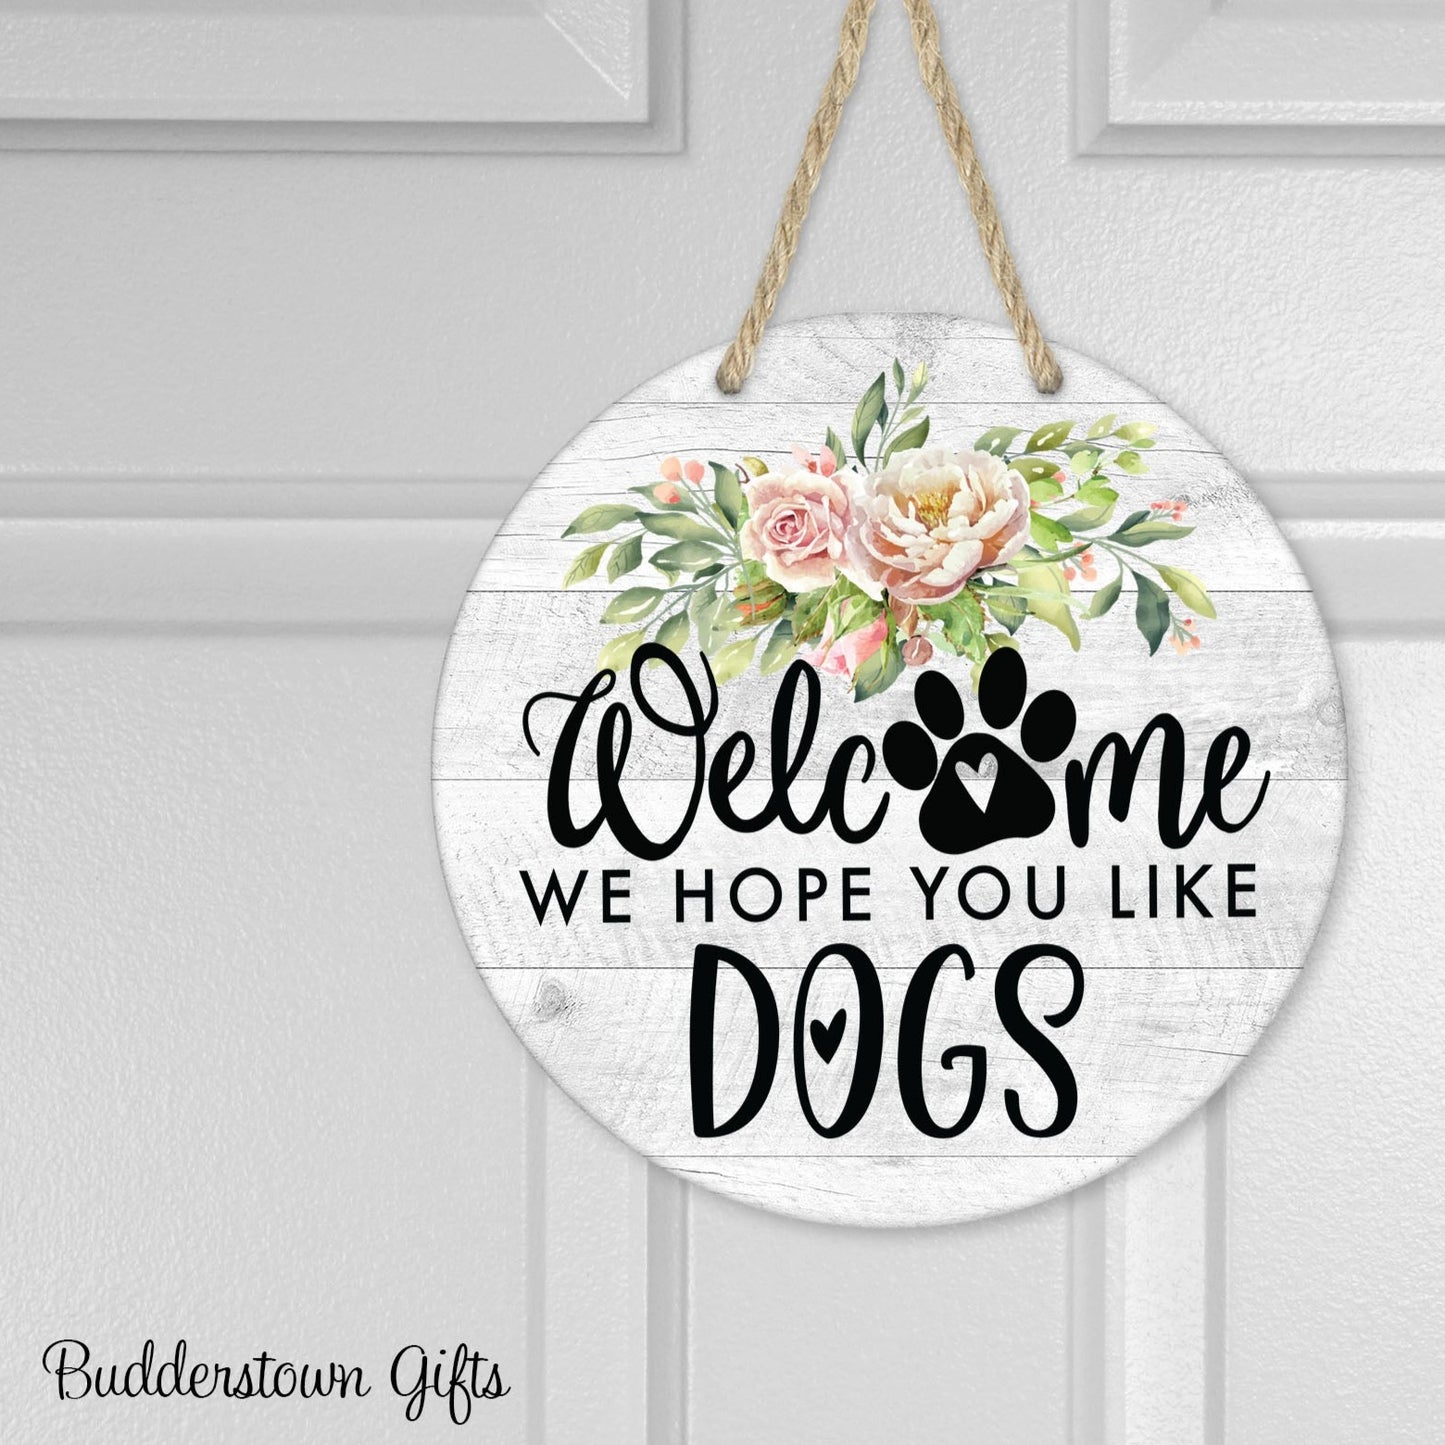 Welcome - We hope you like dogs - door or wall hanger - dog lover